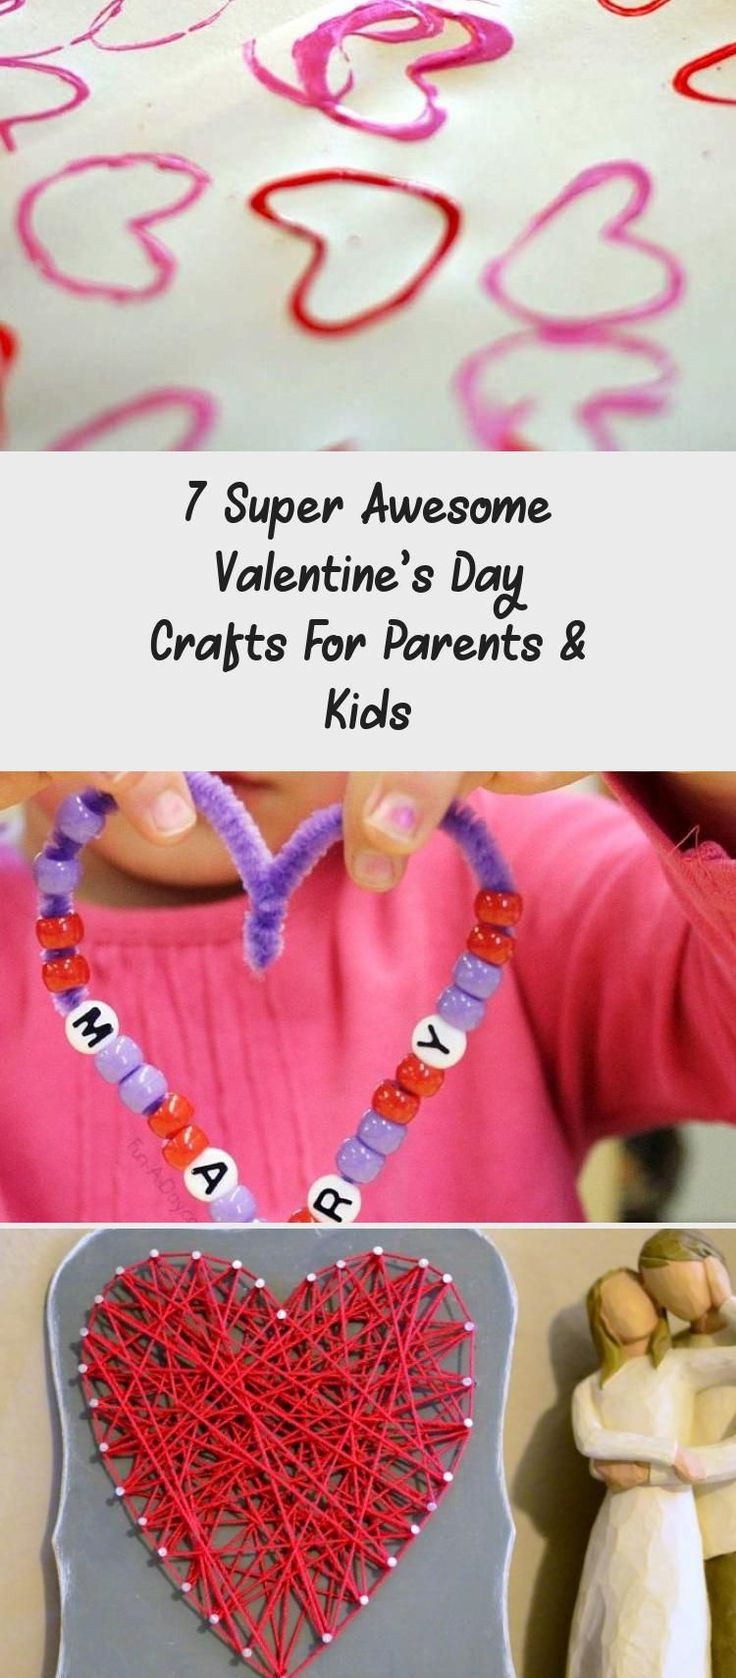 Valentine'S Day Gift Ideas For Parents
 7 Super Awesome Valentine’s Day Crafts For Parents & Kids